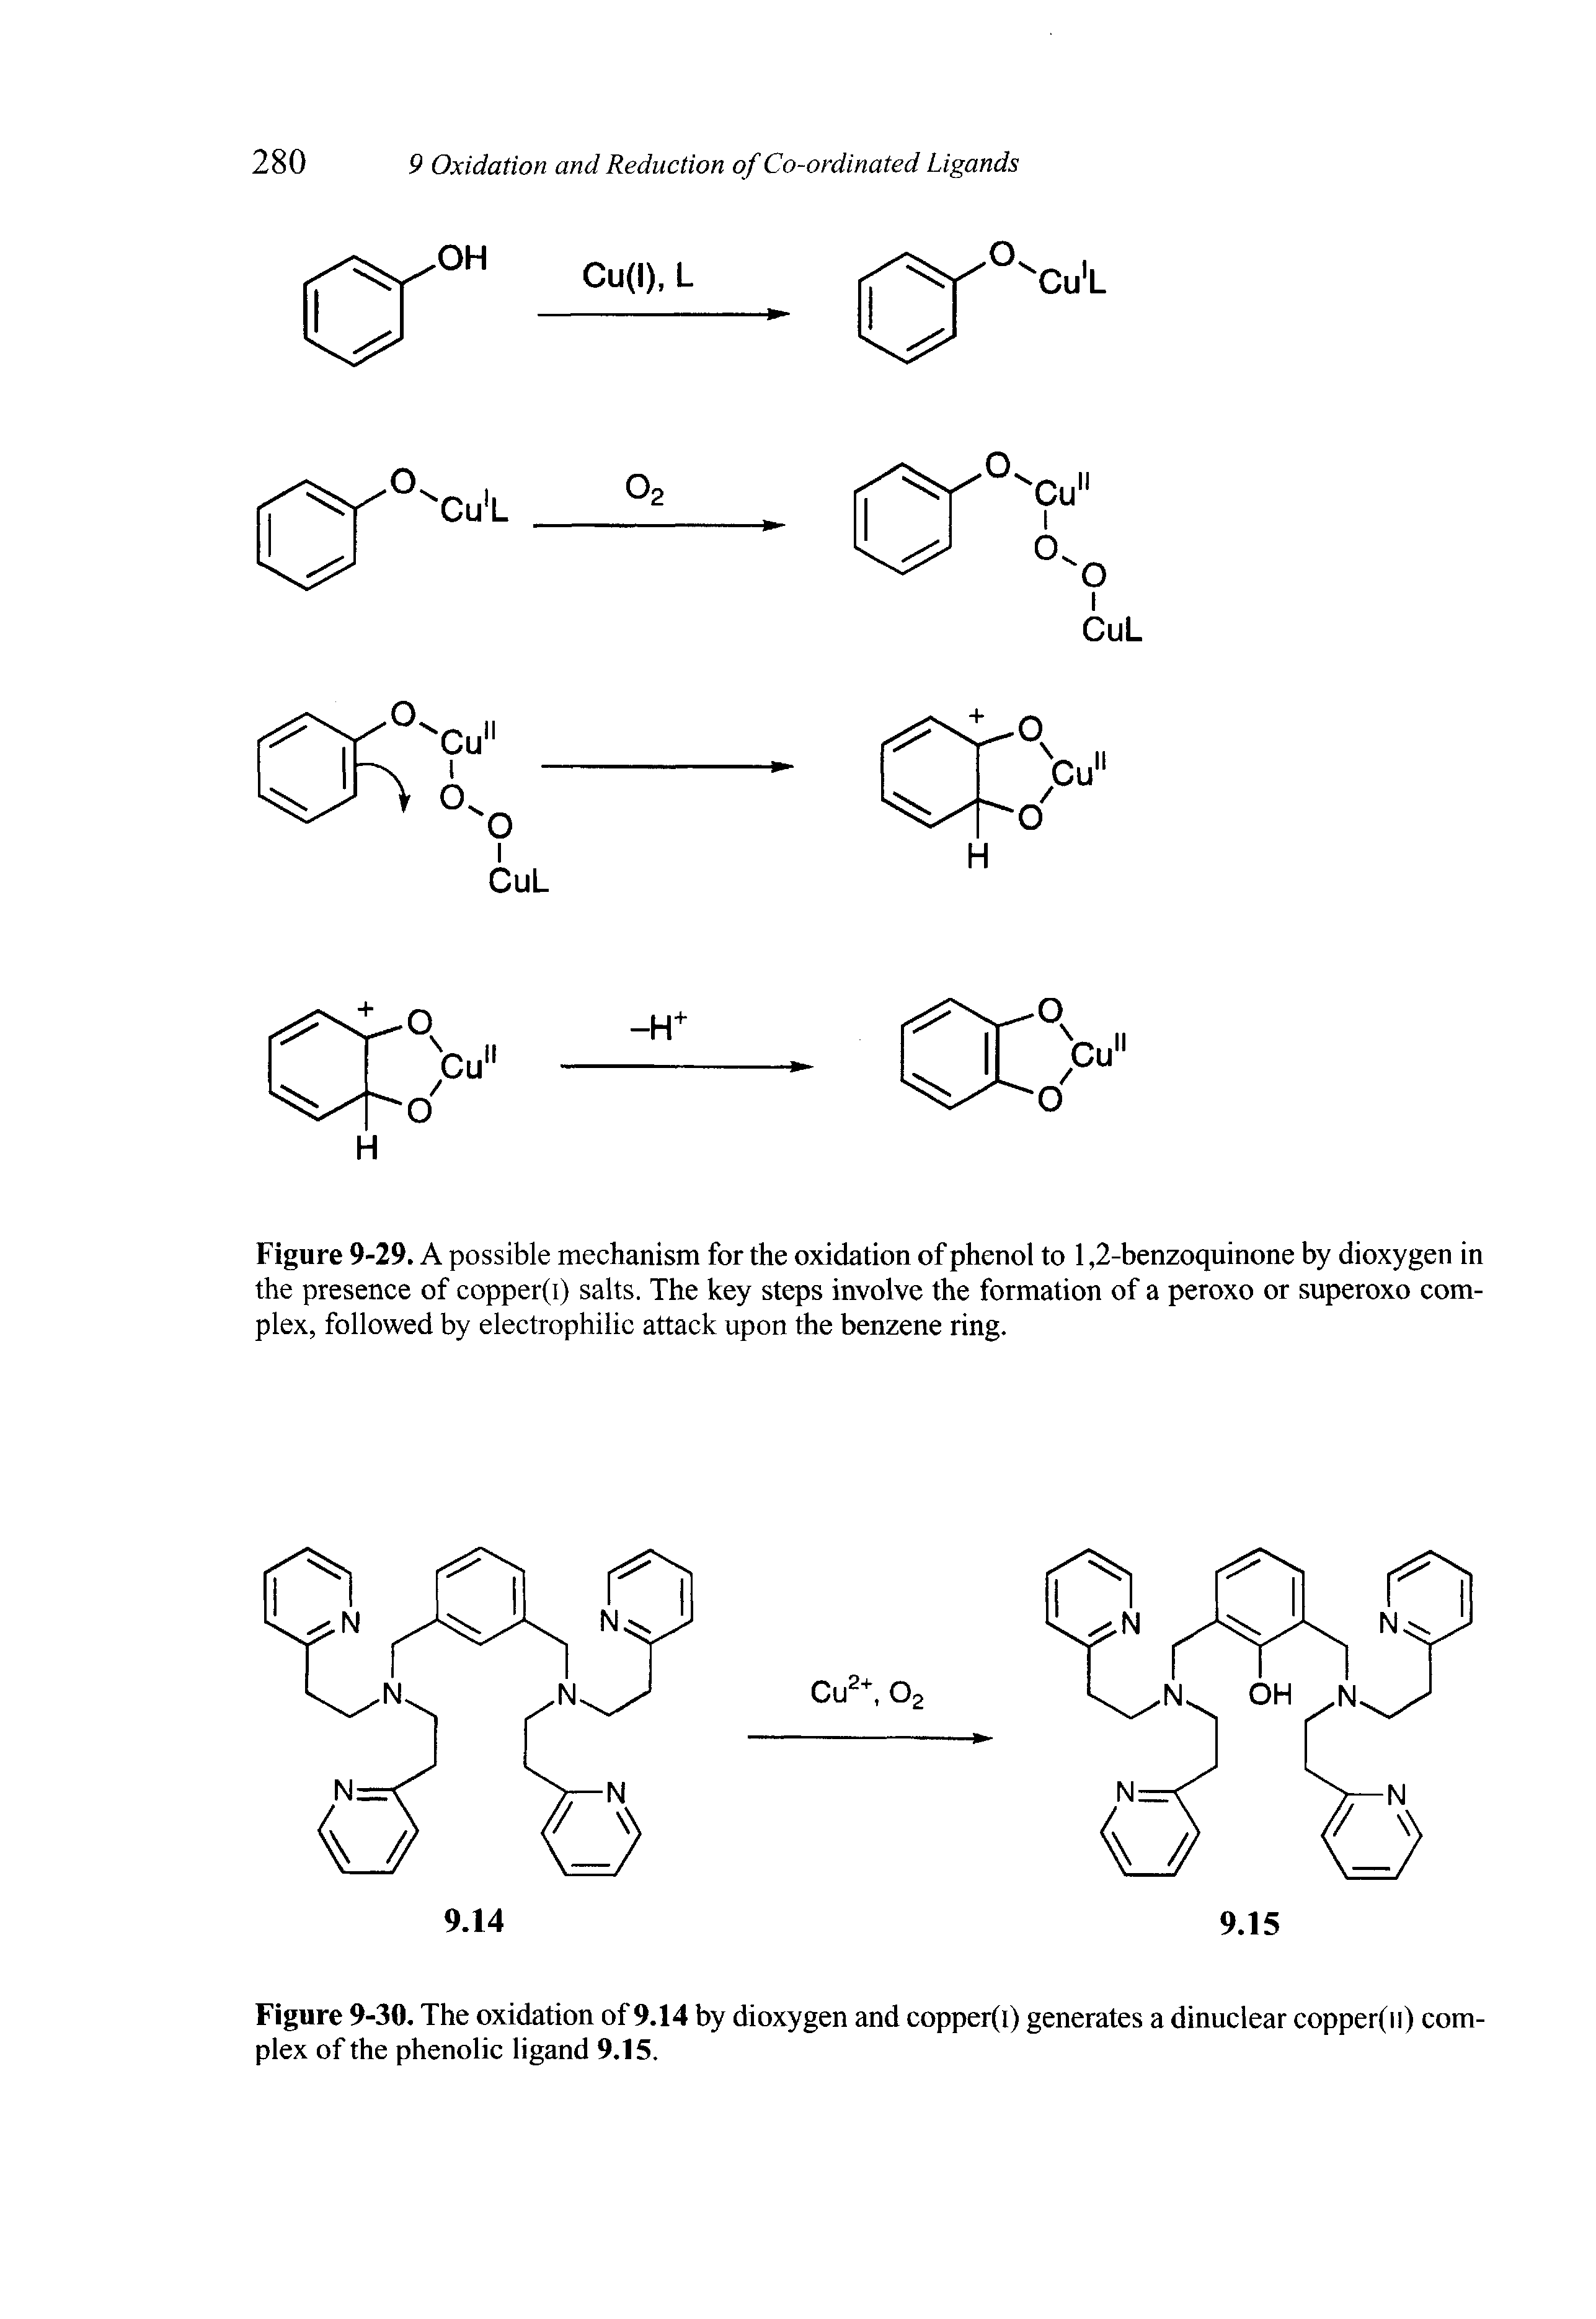 Figure 9-30. The oxidation of 9.14 by dioxygen and copper(i) generates a dinuclear copper(n) complex of the phenolic ligand 9.15.